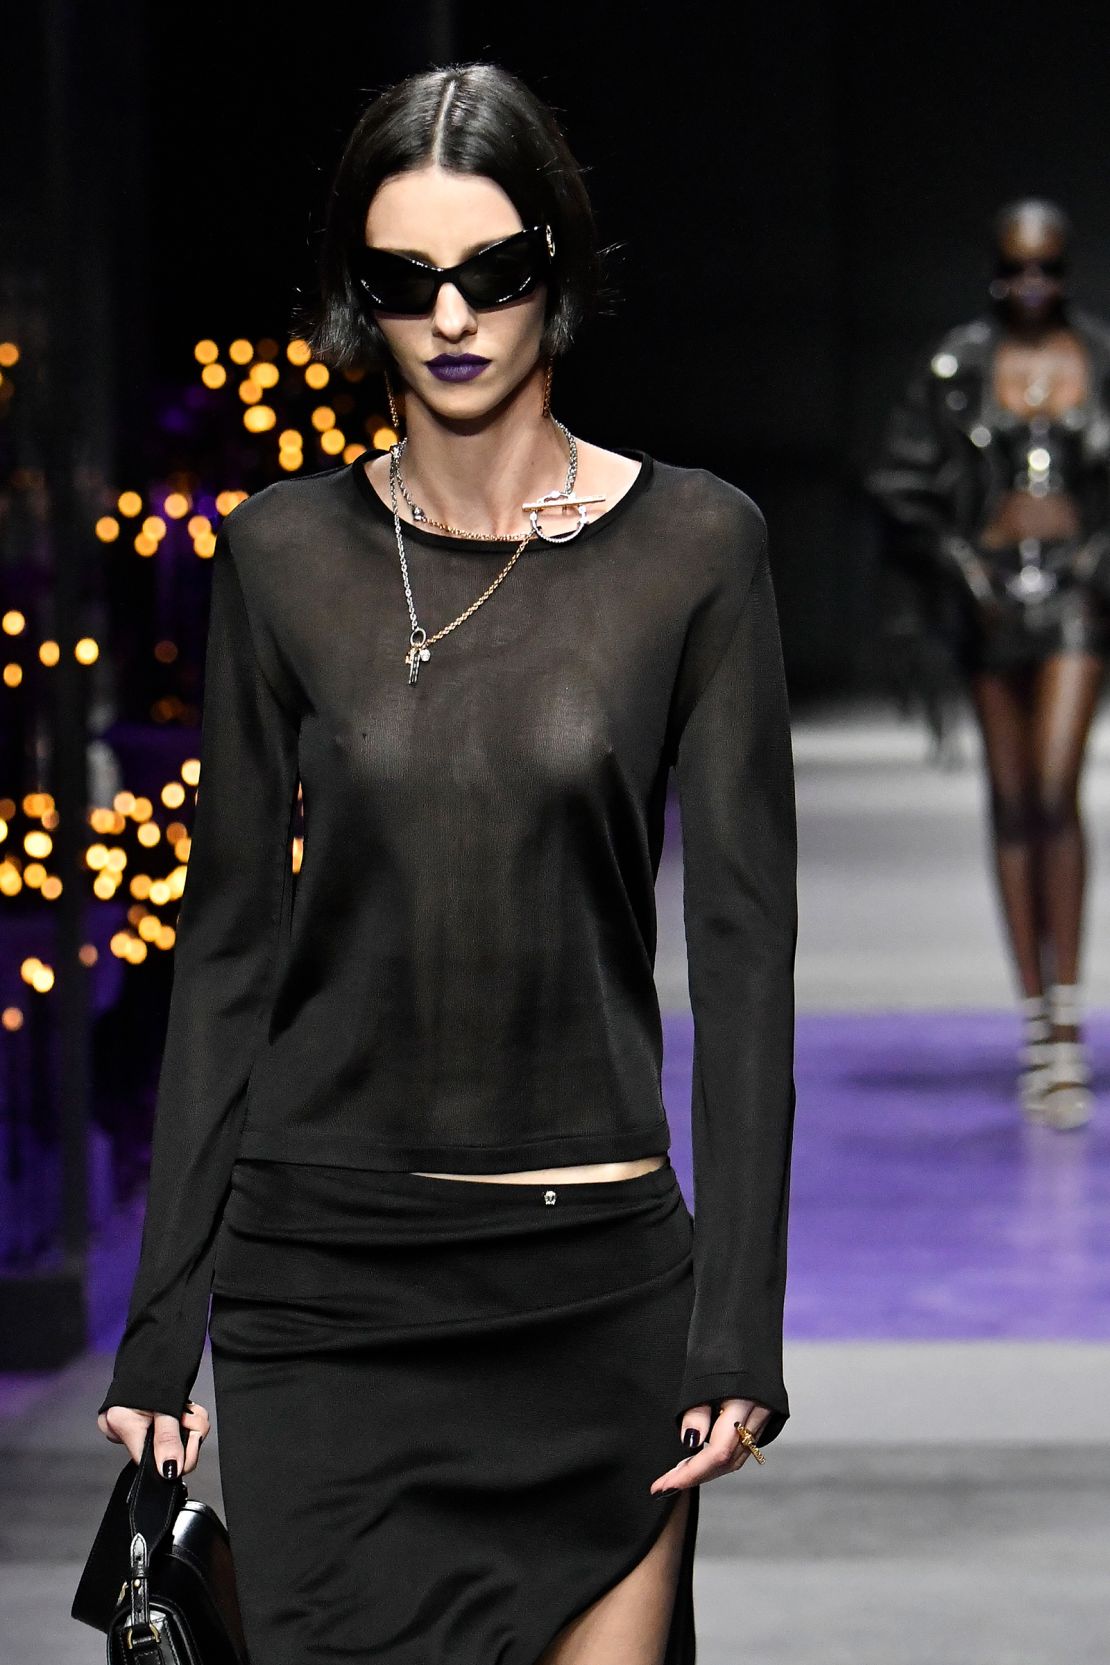 Mesh, leather and lace detailing were pillars of Versace's new collection.